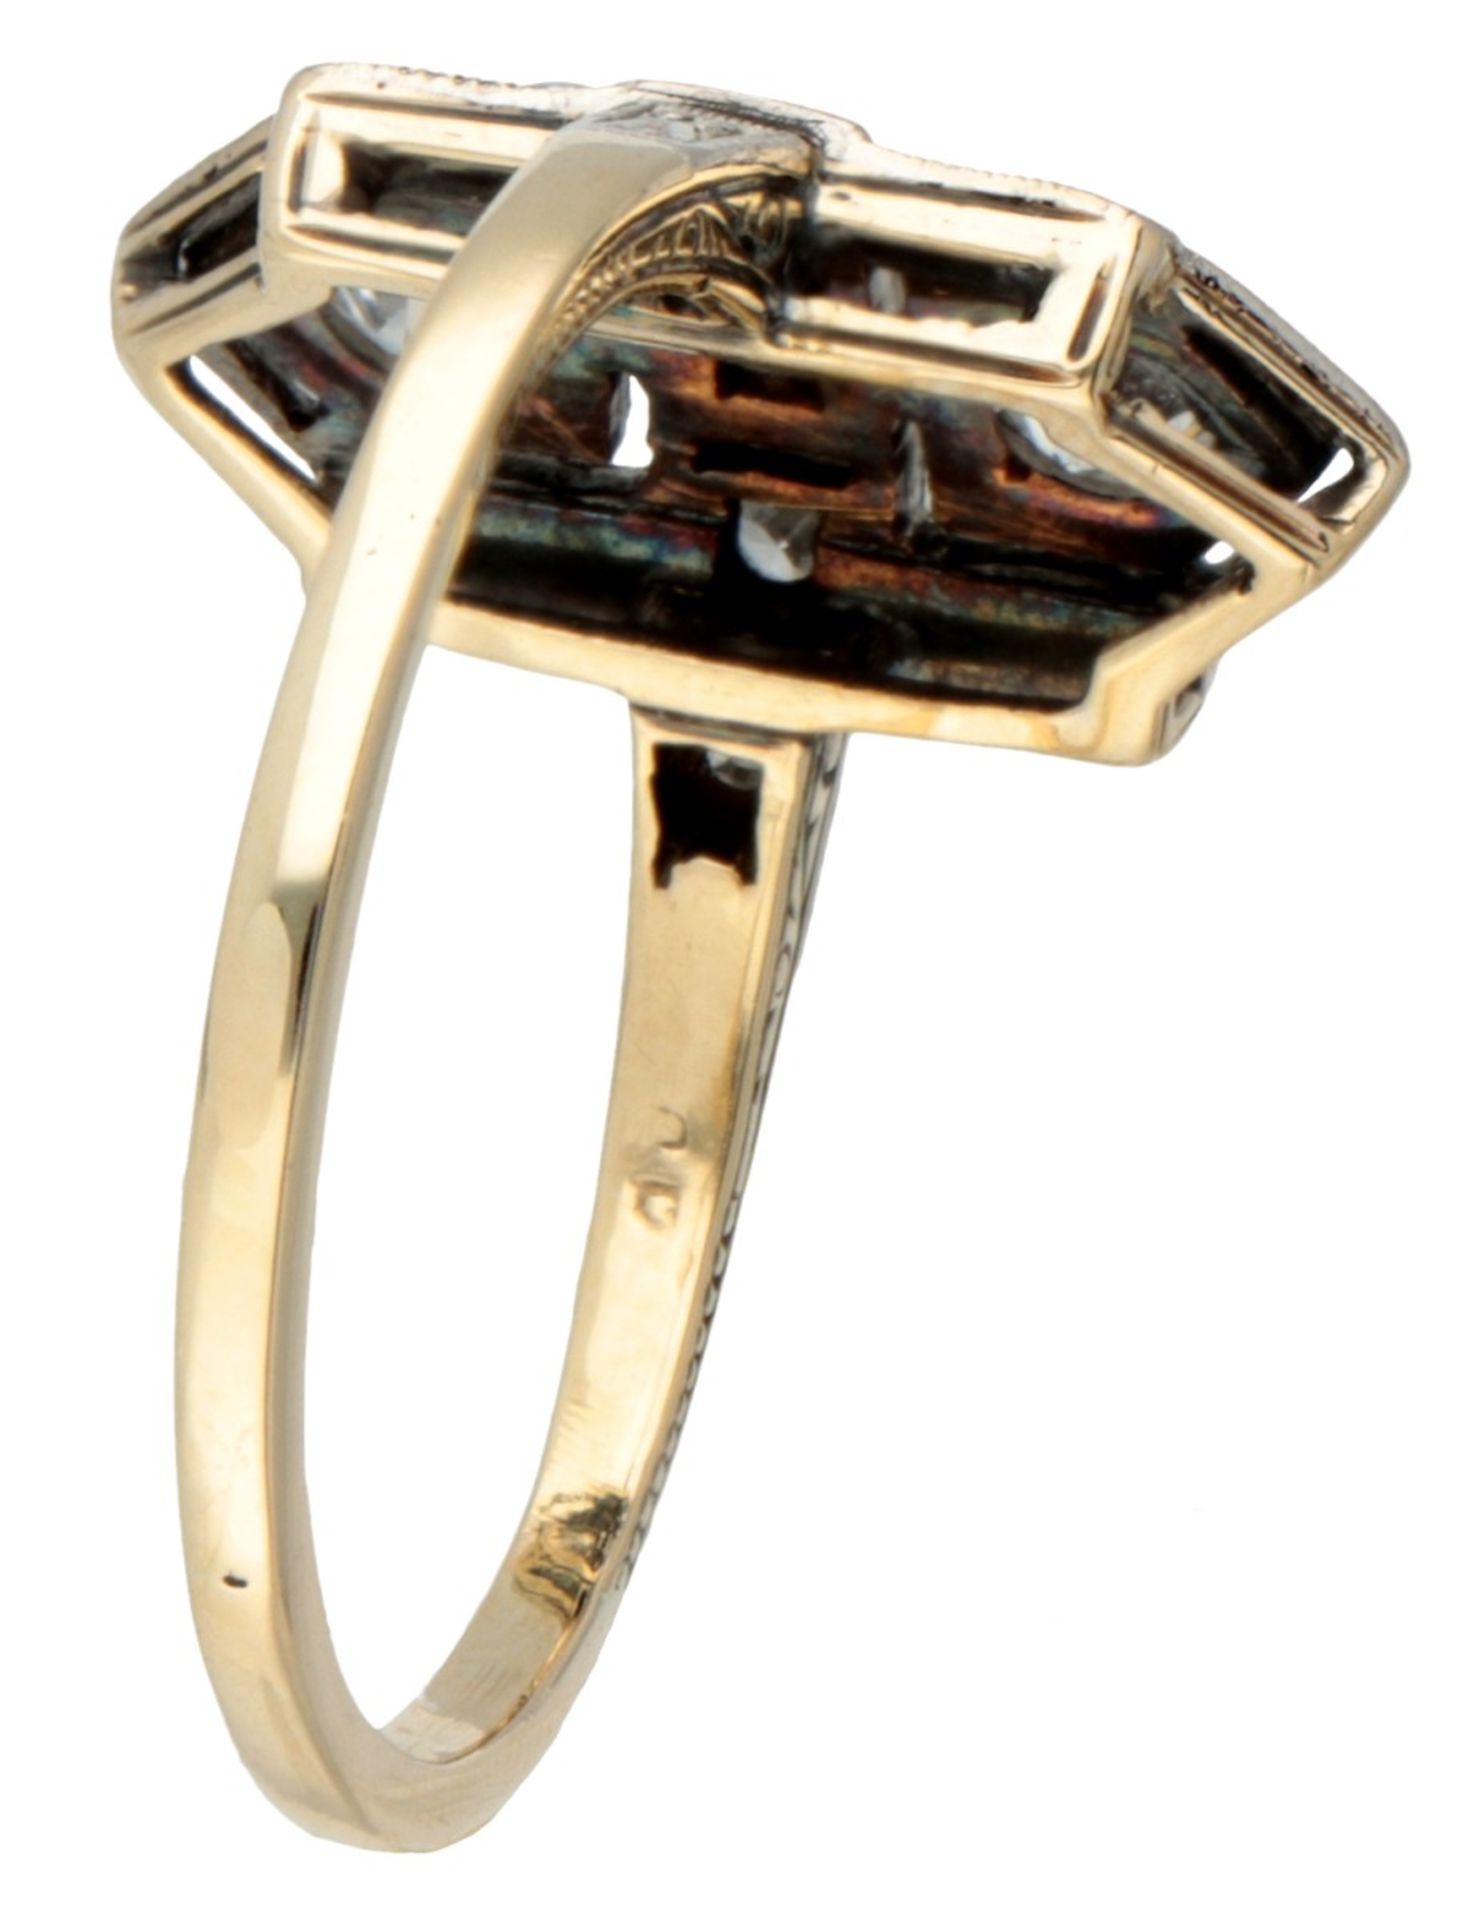 10K. Yellow gold and Pt 900 platinum Art Deco ring set with approx. 0.26 ct. diamond and onyx. - Image 2 of 2